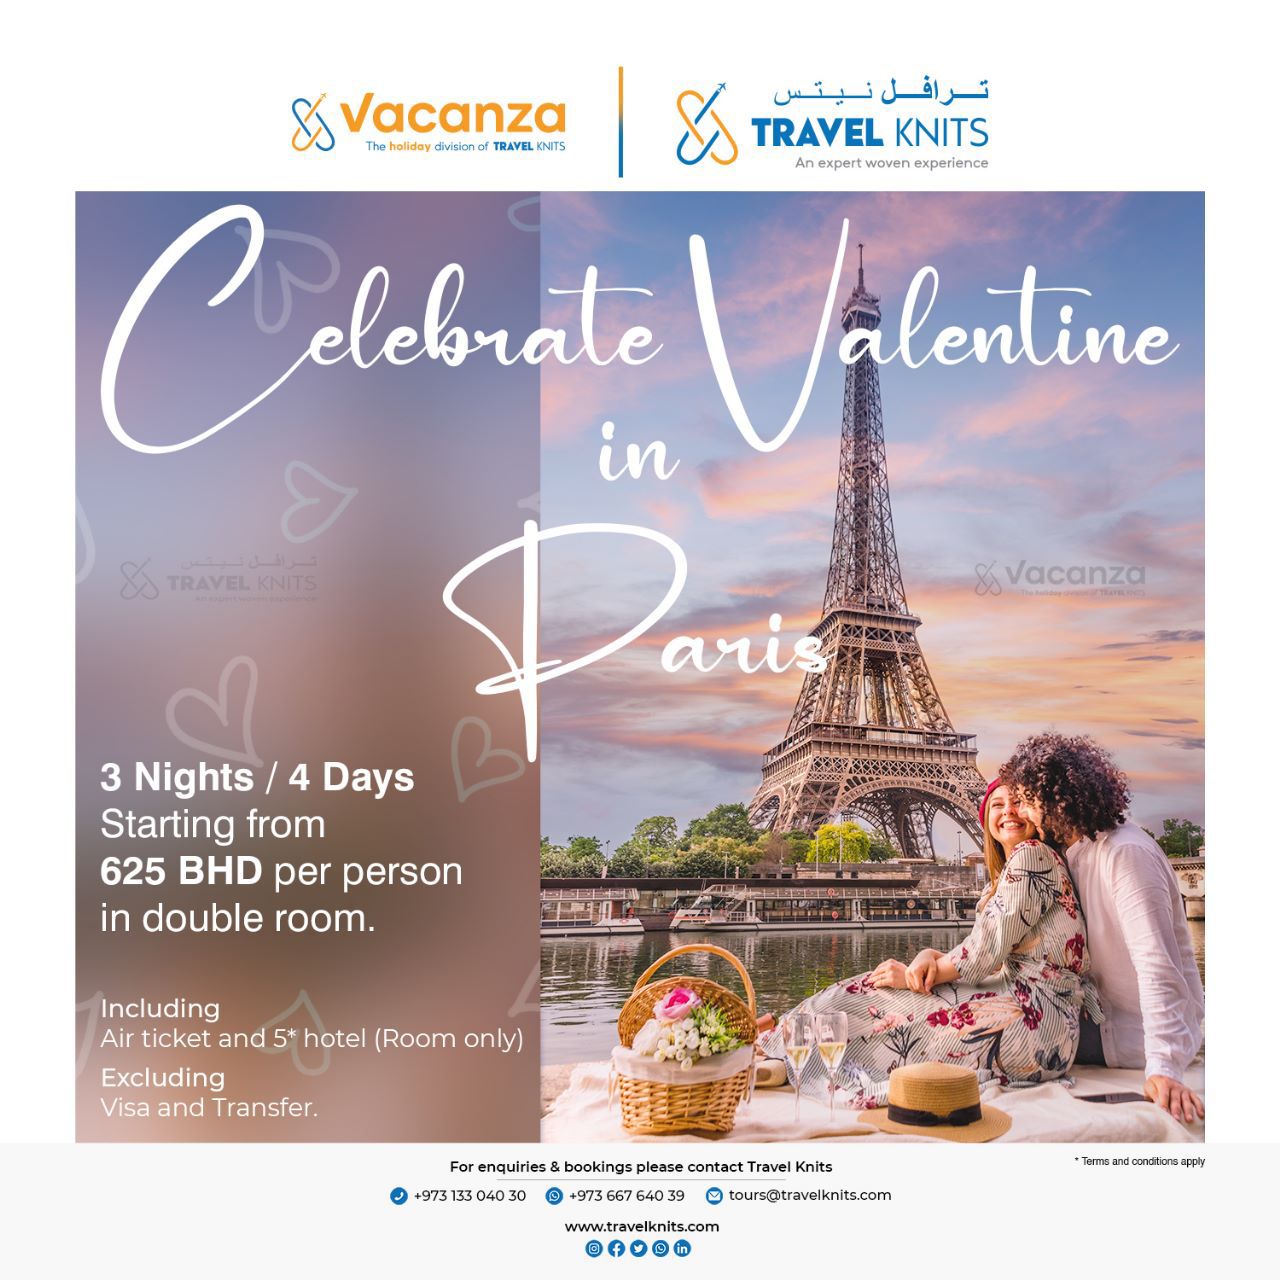 Celebrate valantine in parisTour Packages - Book honeymoon ,family,adventure tour packages to Celebrate valantine in paris|Travel Knits